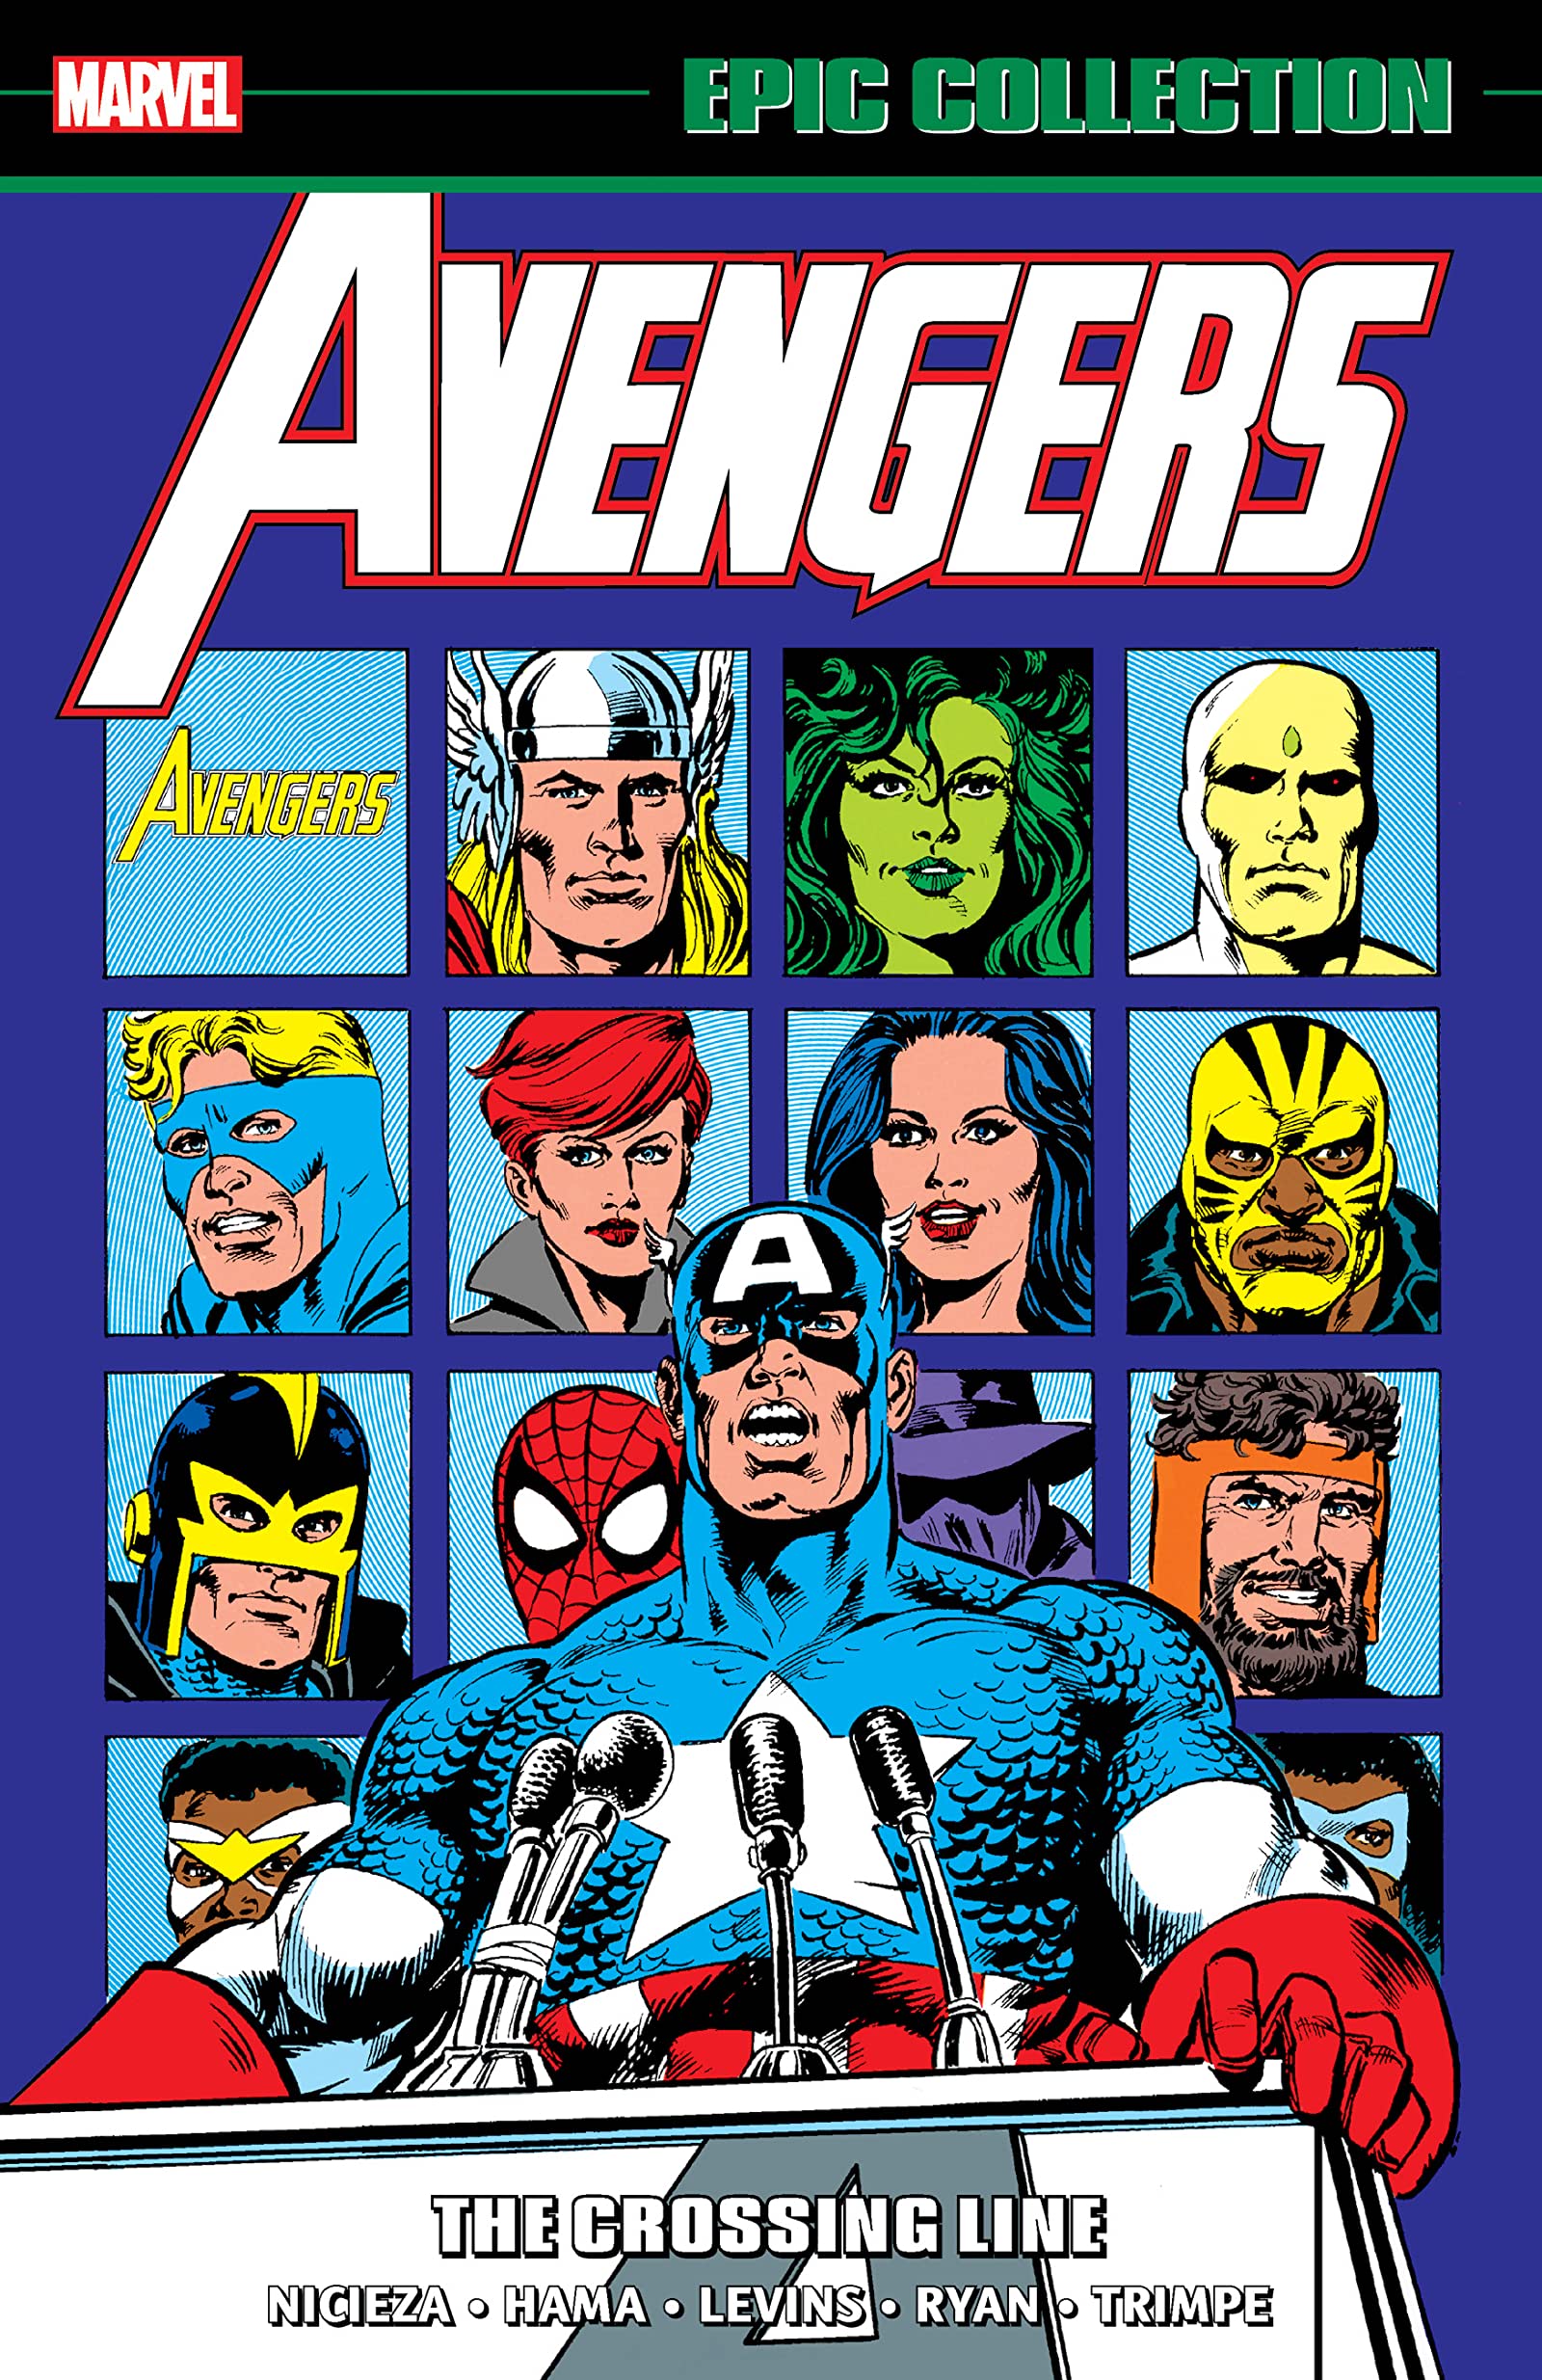 https://static.wikia.nocookie.net/marveldatabase/images/4/4d/Epic_Collection_Avengers_Vol_1_20.jpg/revision/latest?cb=20220326222507